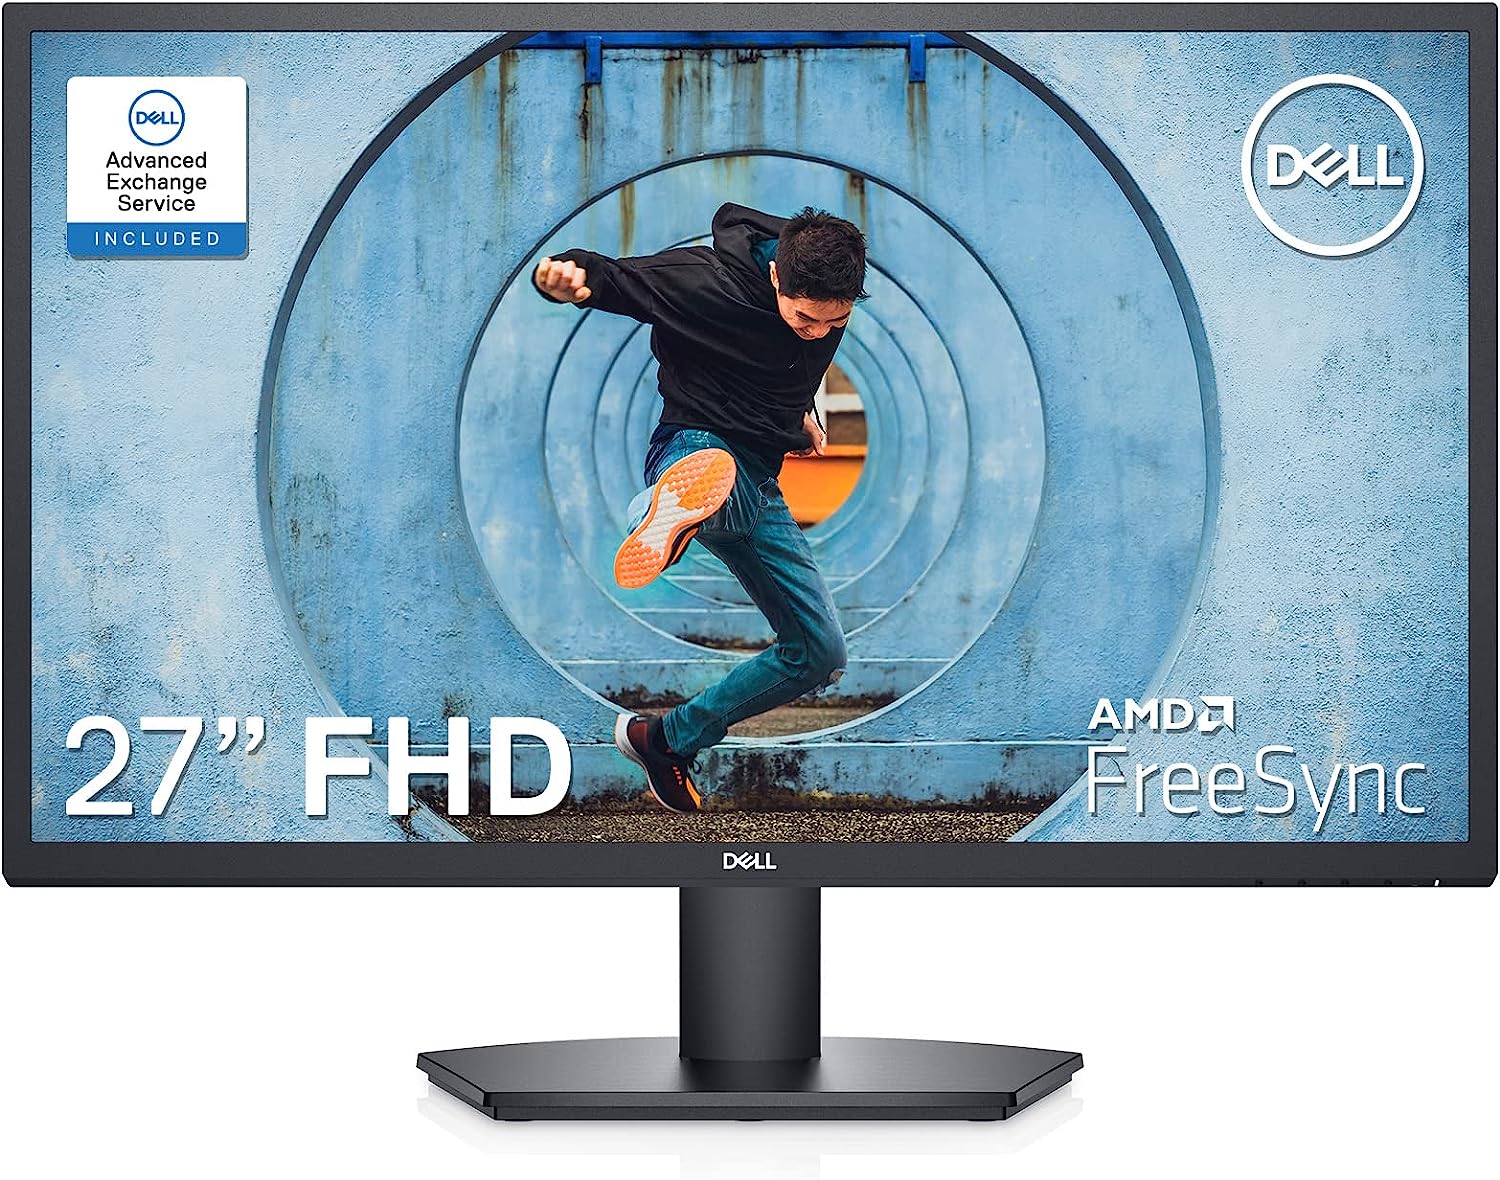 Dell 27 inch Monitor FHD (1920 x 1080) 16:9 Ratio with [...]